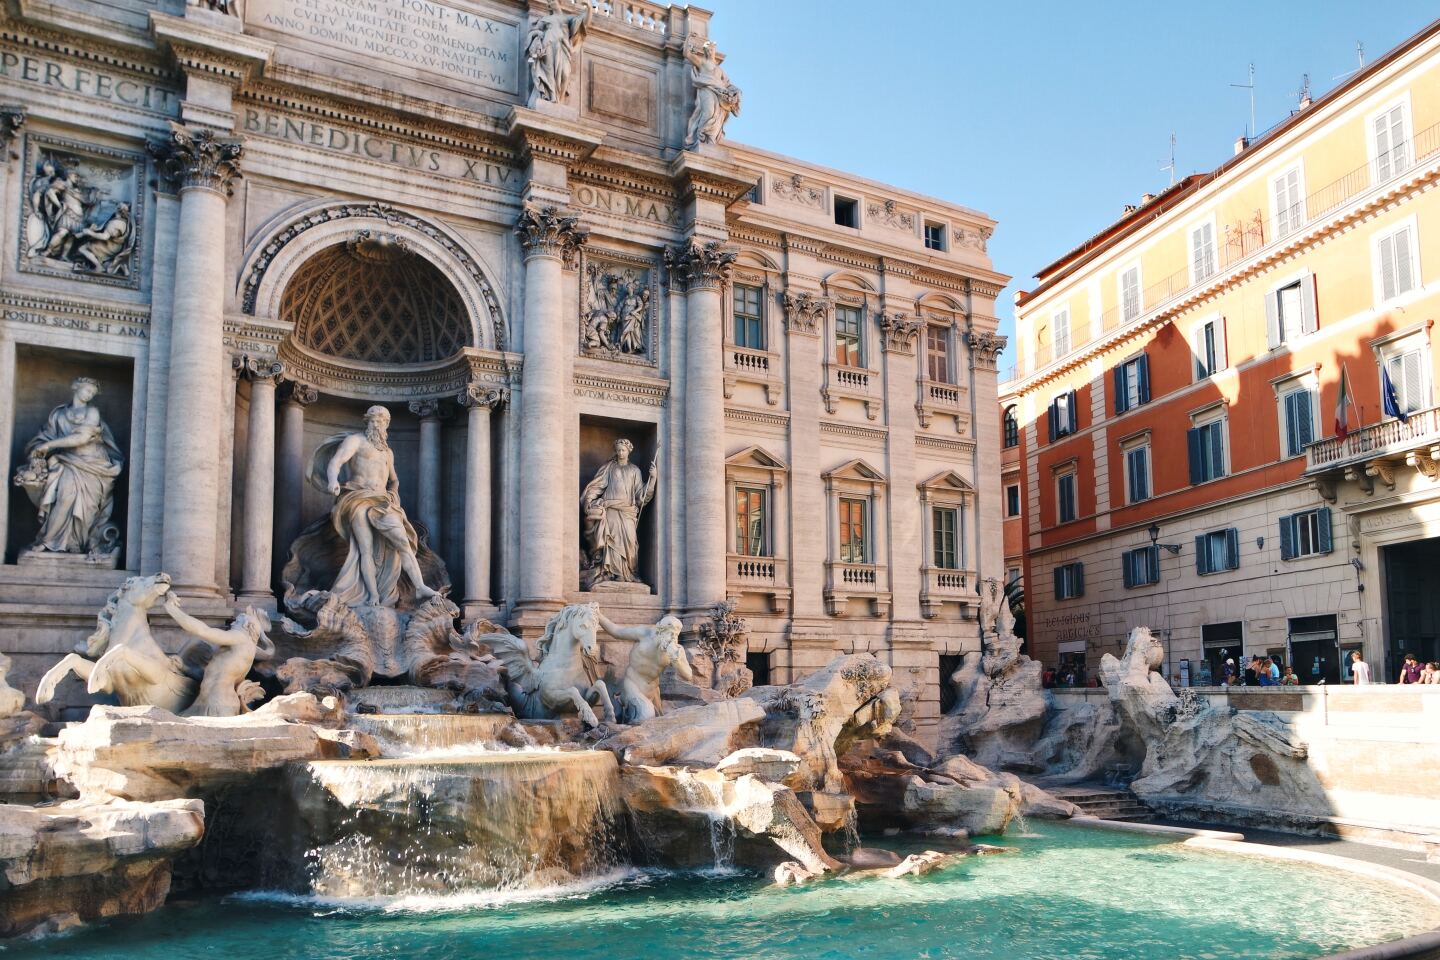 <h3>Azamara Cruises</h3> <p><b>Itinerary: Italy Intensive Voyage</b><br><b>Best for: More affordable Italy sailing</b><br><b>Number of days: 10</b><br><b>Starting cost: $2,320 per person</b></p> <p>Sailing round-trip from Venice on the upscale 684-passenger <i>Azamara Pursuit</i>, this “<a class="Link" href="https://fave.co/3ZKmyIt" rel="noopener">Italy Intensive Voyage</a>,” which sets sail in June 2024, takes passengers to Bologna, where optional excursions include a visit to the Ferrari Museum, and the historic Adriatic port city of Ancona, before cruising over to Kotor, Montenegro, with its impressive fjord approach and UNESCO-recognized Old Town. Heading south, you’ll stop by Taranto in Puglia and Sicily’s Giardini Naxos (near Taormina) and Palermo, before lingering in Amalfi, Sorrento, and Capri. There’s the bonus of a day in Rome (accessible from the port of Civitavecchia). It’s a packed itinerary and a great price.</p>